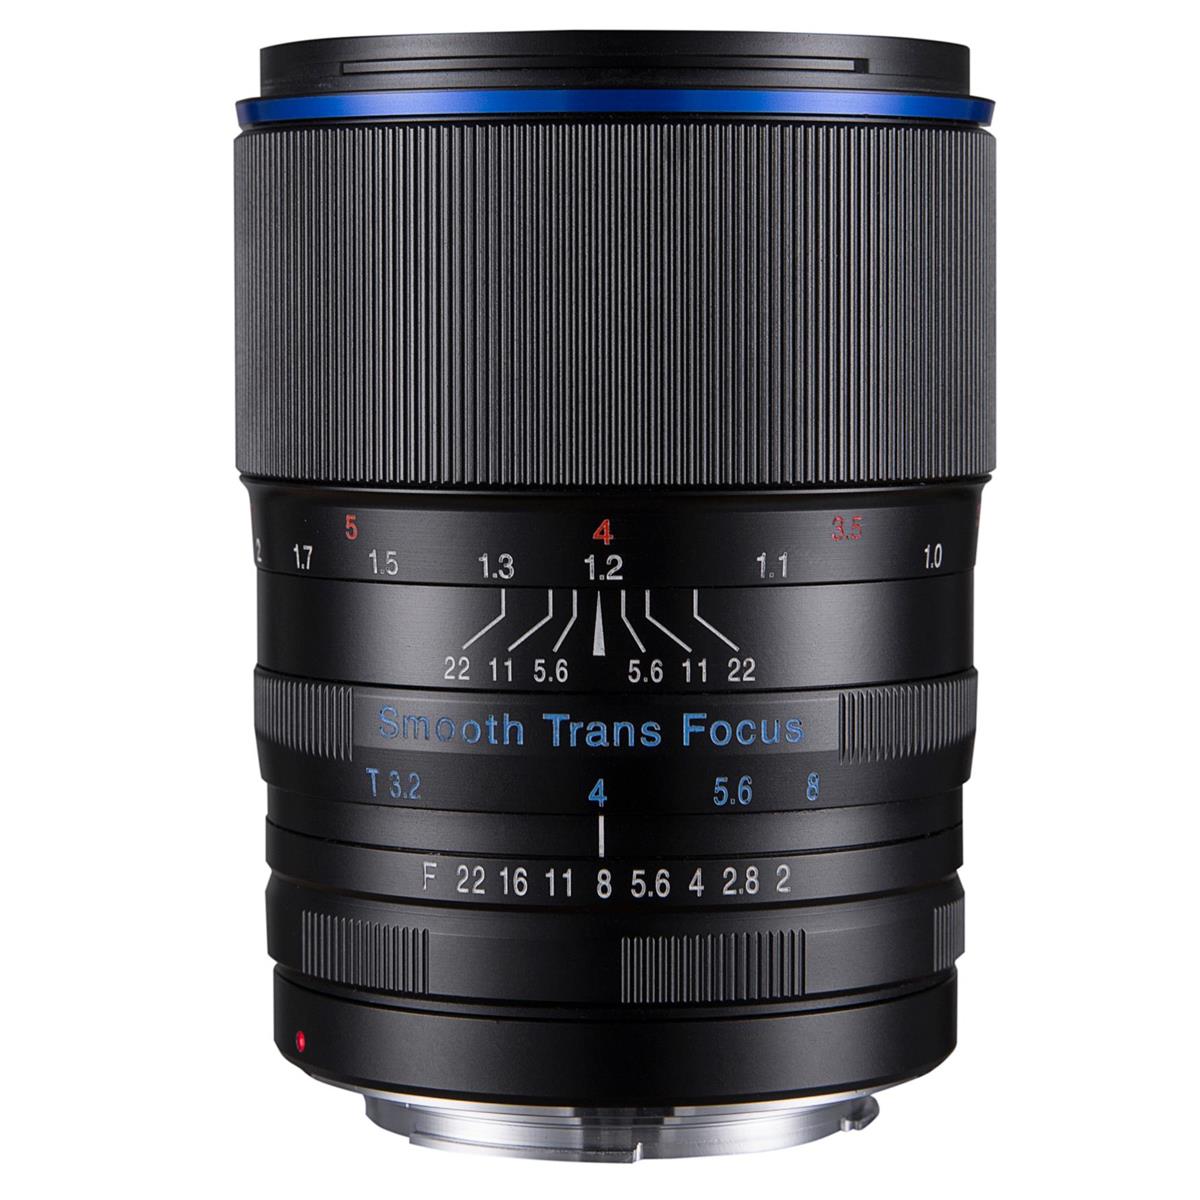 Venus Laowa 105mm f/2 Smooth Trans Focus Lens for Canon